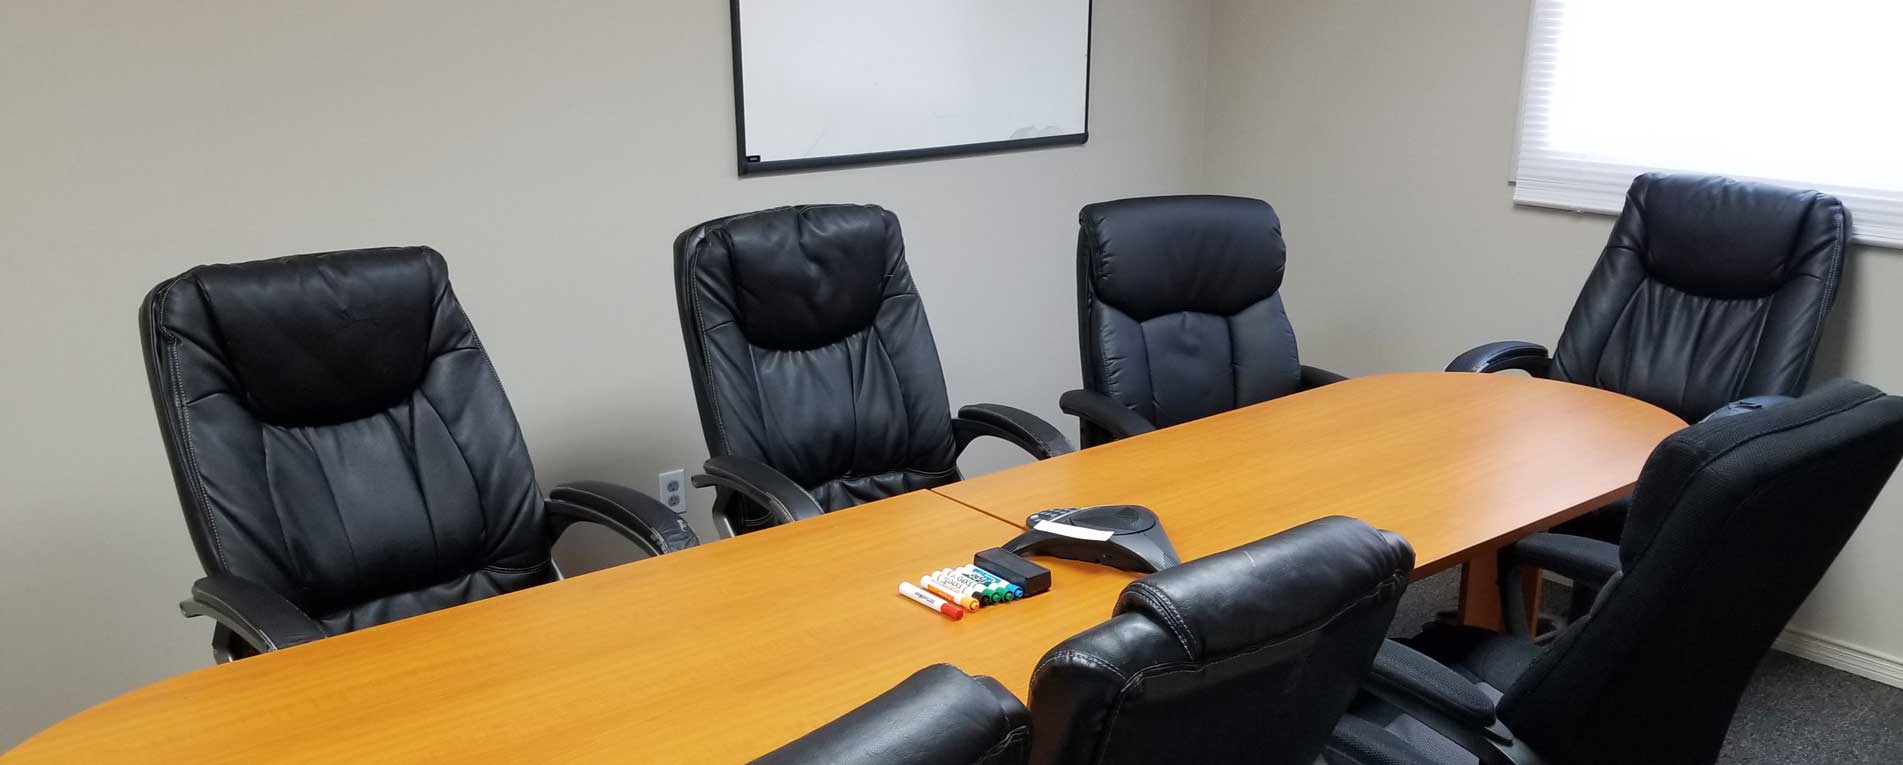 Yates Engineering's conference table and room